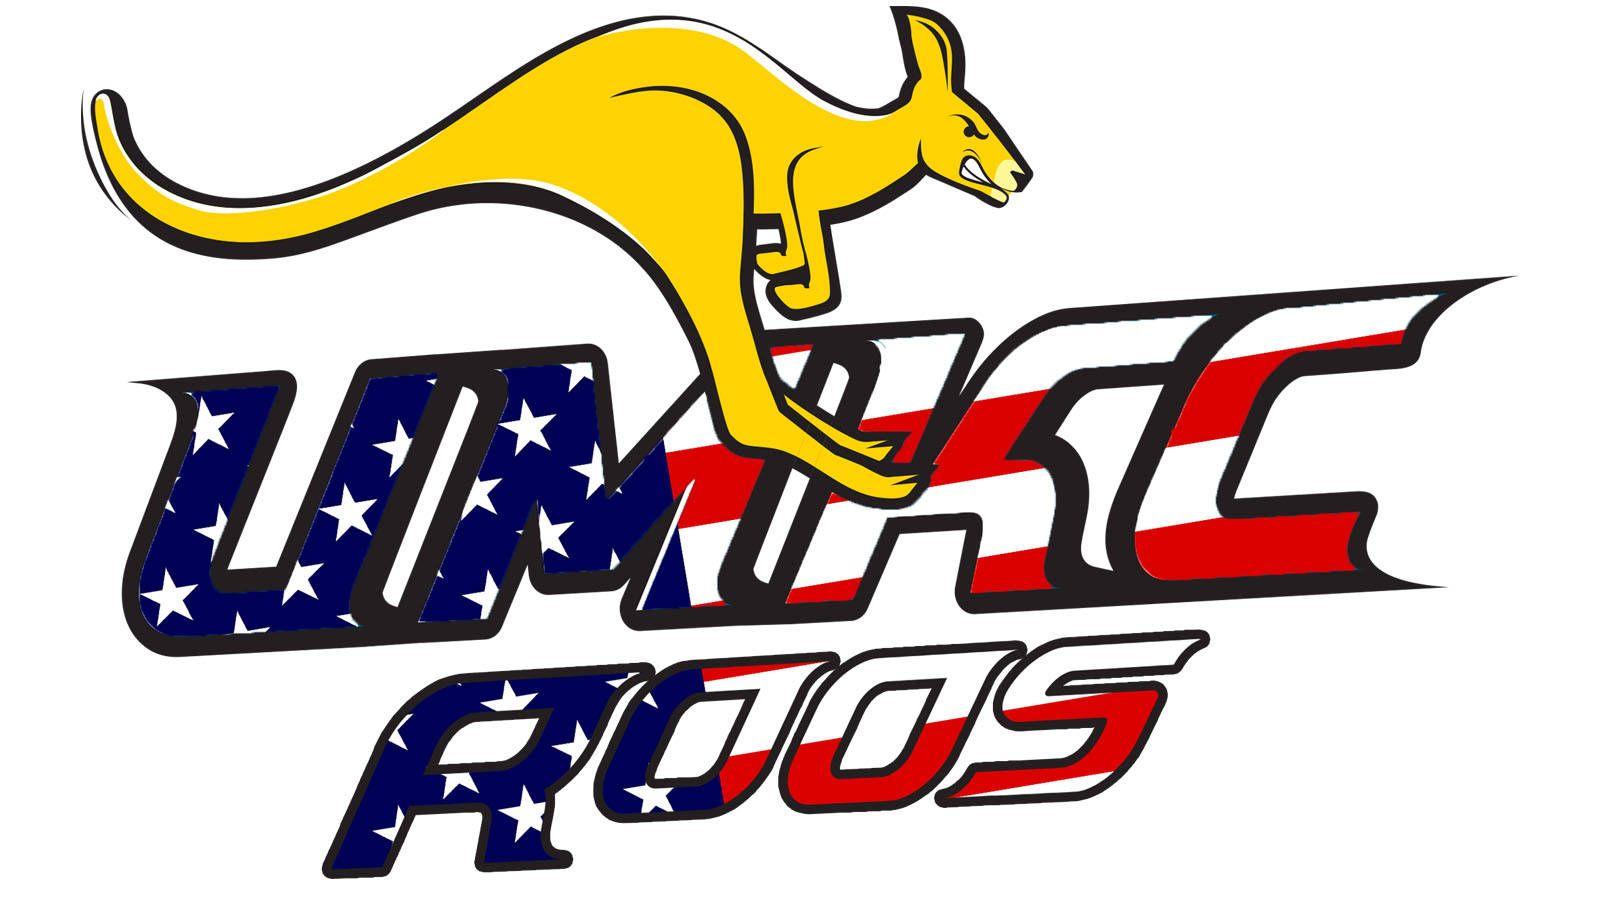 UMKC Kangaroos Logo - Military Appreciation Day Set for December 12, OPERATION: SELL OUT ...